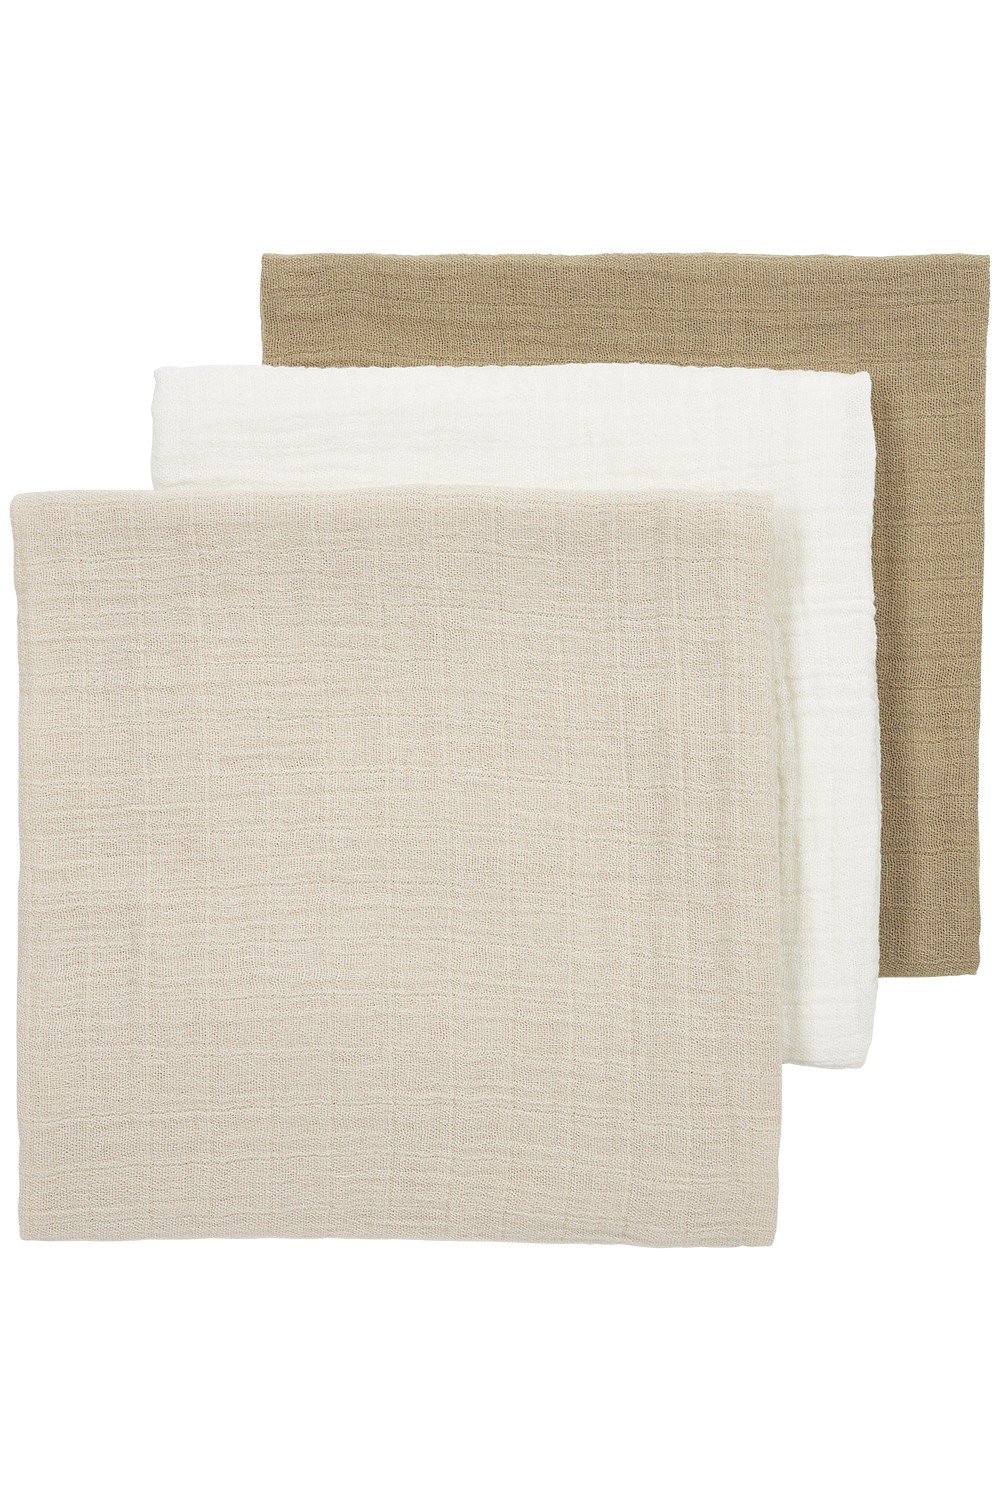 Pre-washed Musselin Mullwindeln 3er pack Uni - offwhite/soft sand/taupe - 70x70cm